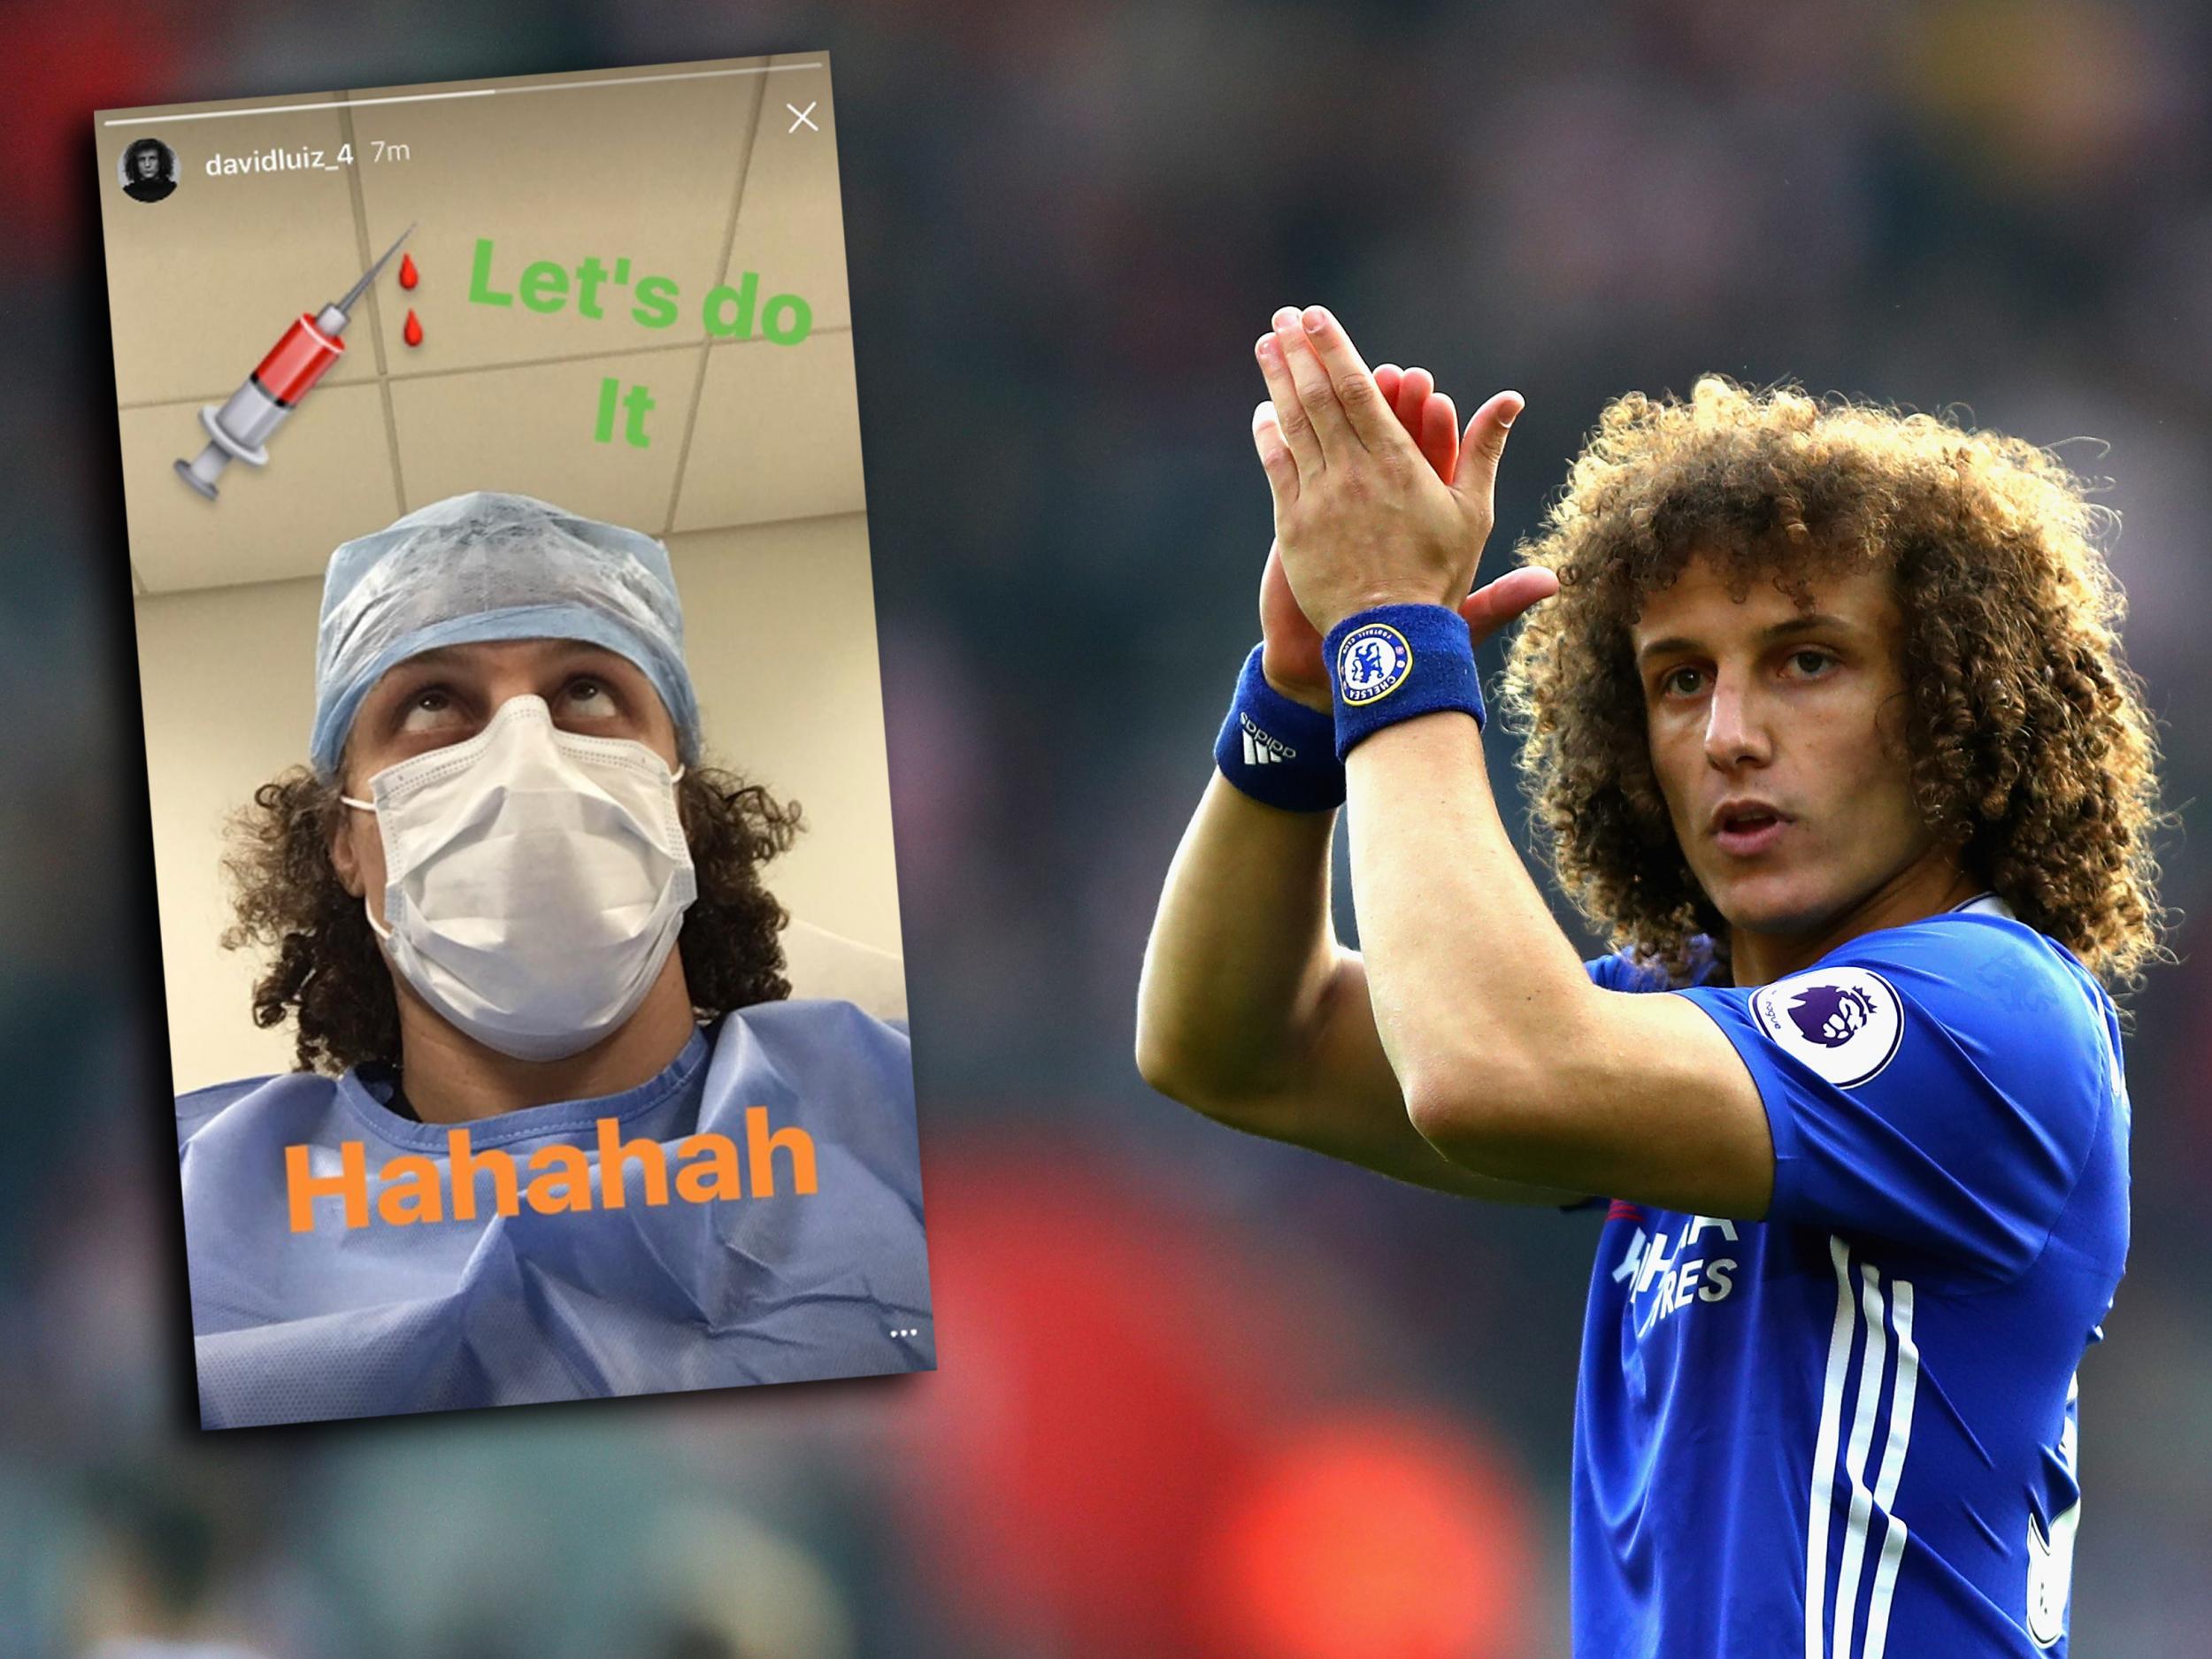 David Luiz took to Instagram to share a picture of himself in hospital